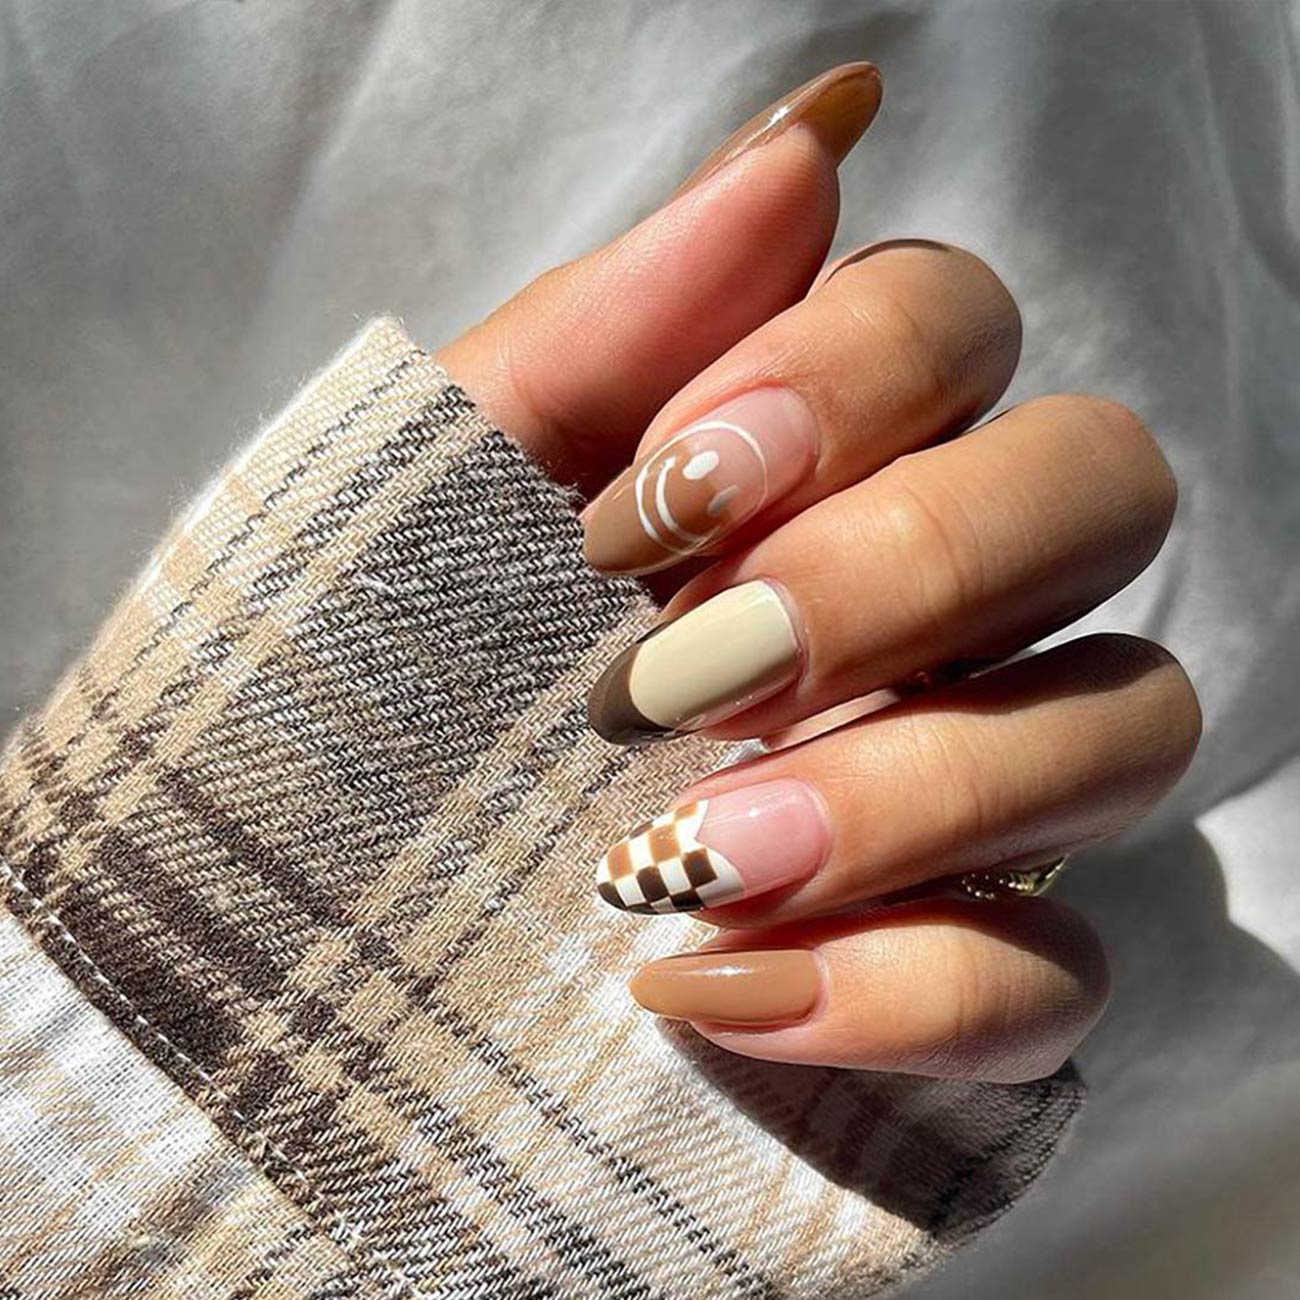 Autumn nail art inspiration available at Pacific Place